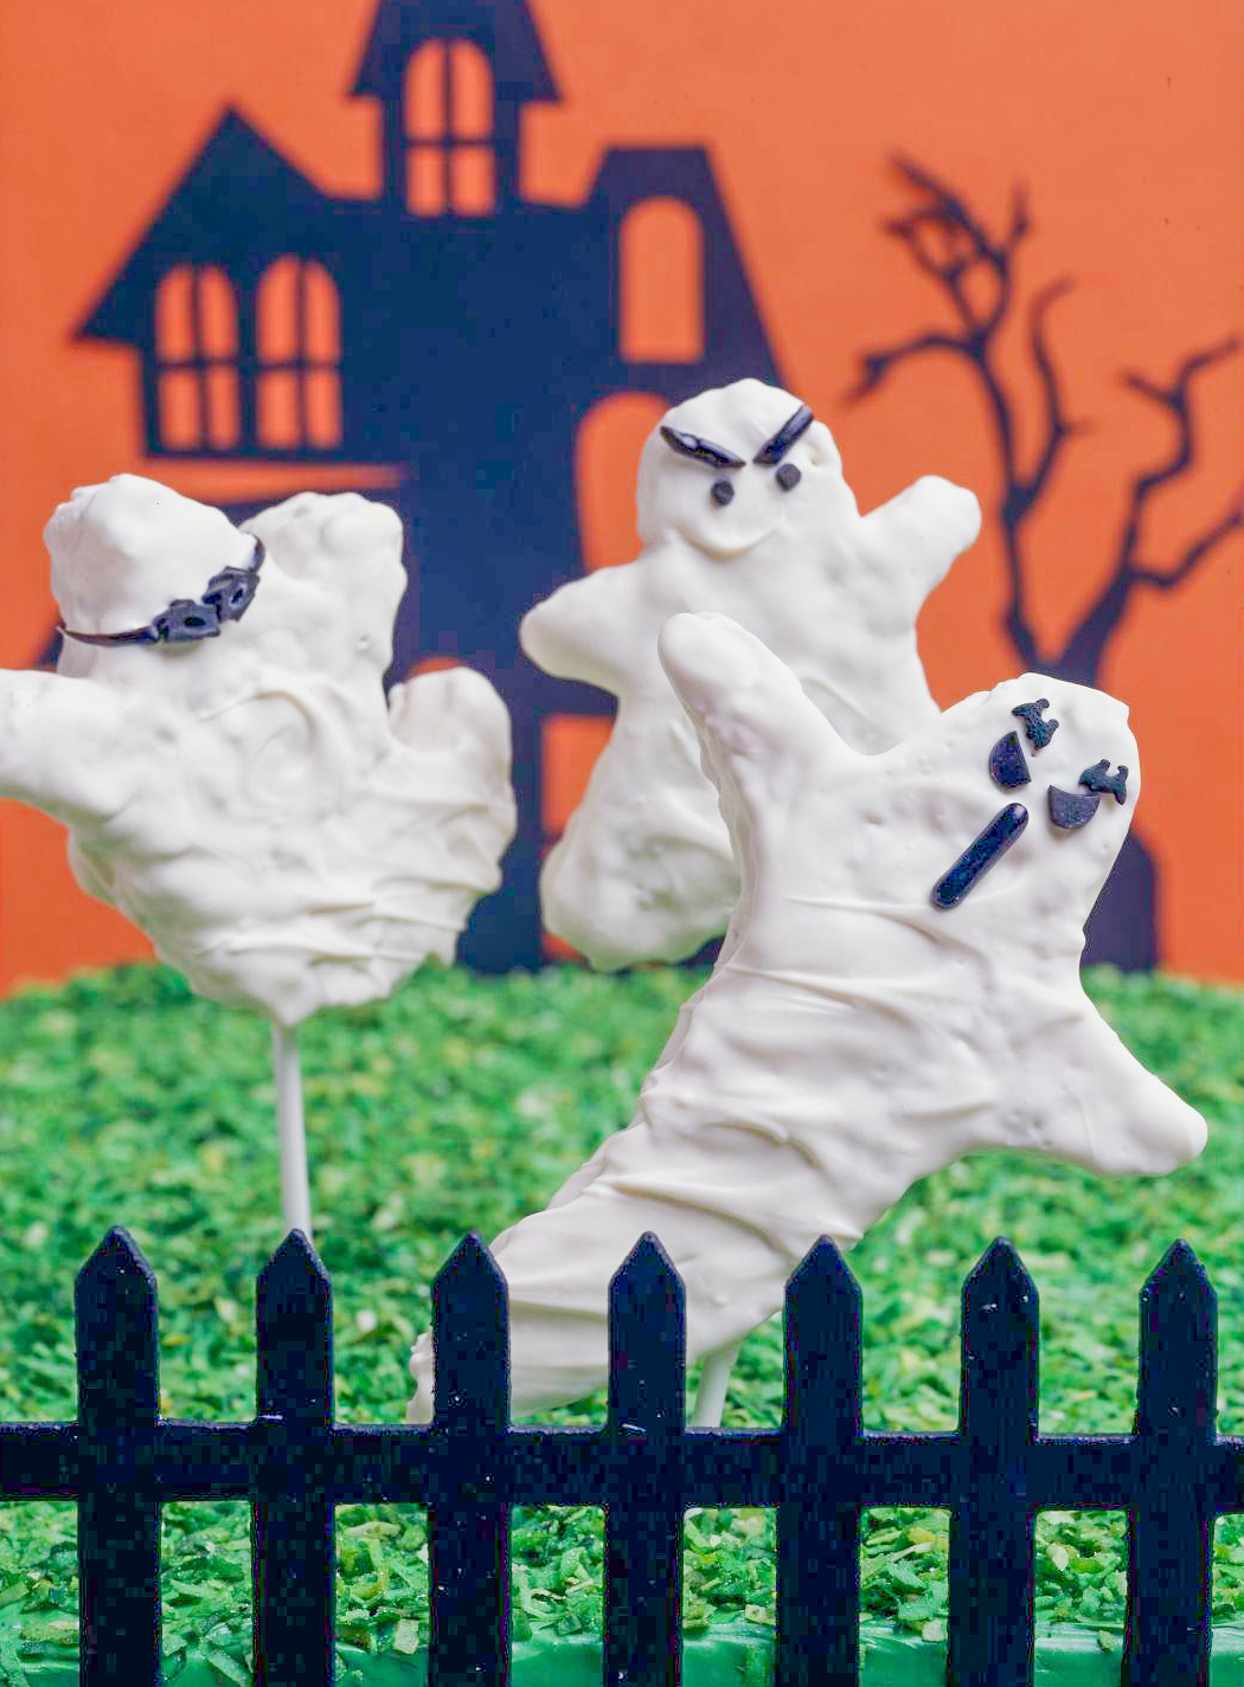 White-as-a-Ghost Pops